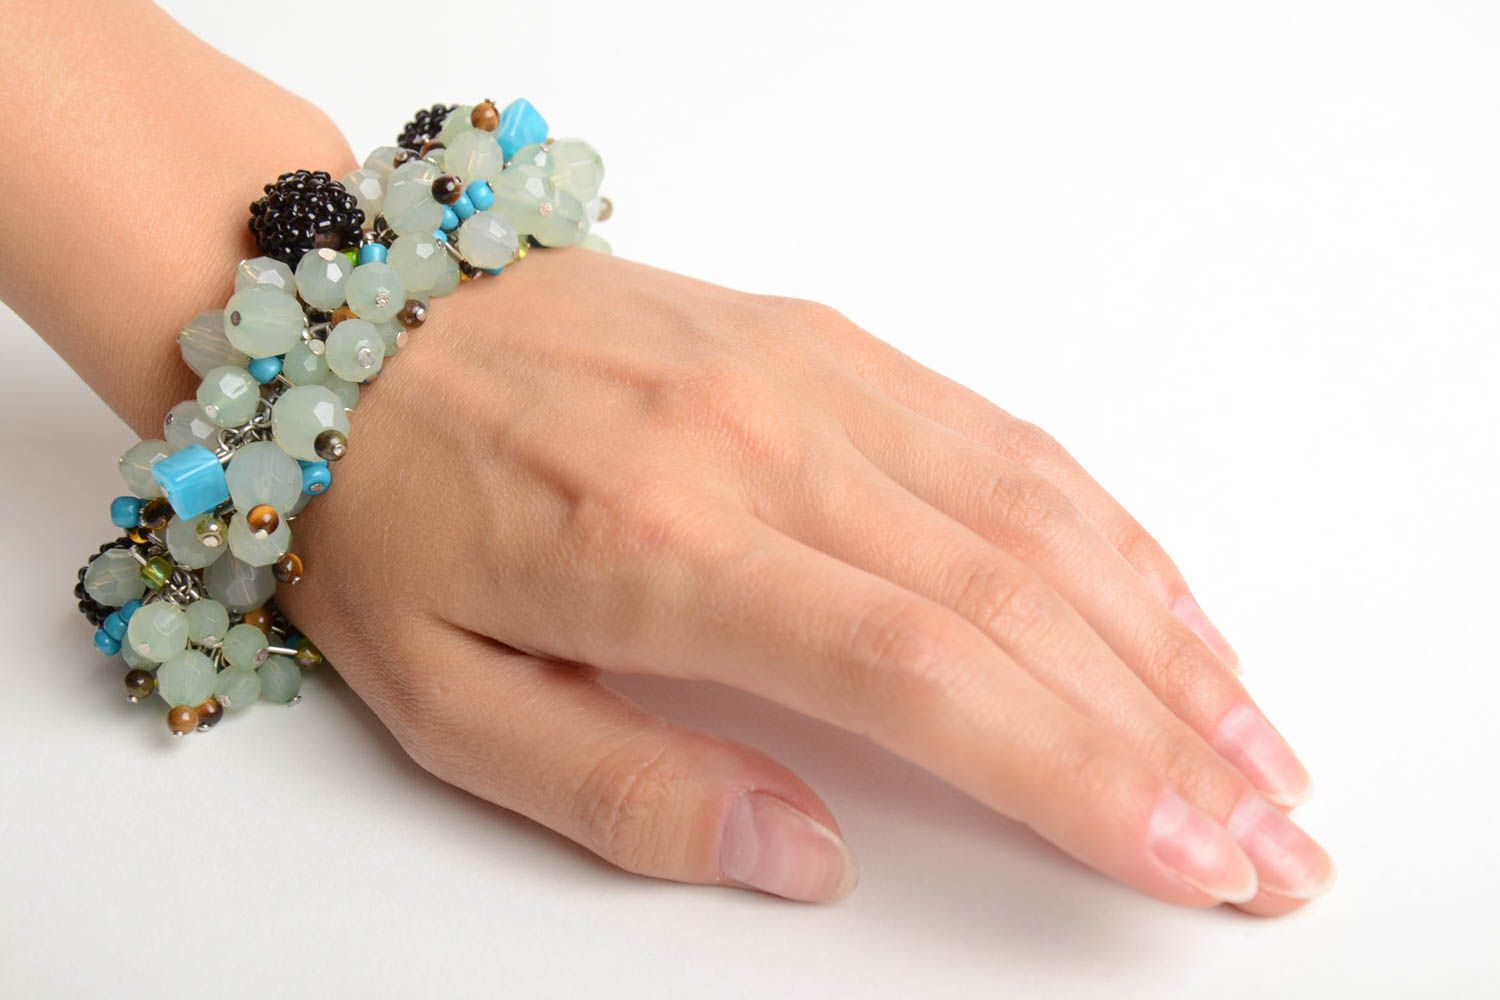 Handmade wrist bracelet with glass and plastic beads on metal chain for women photo 2